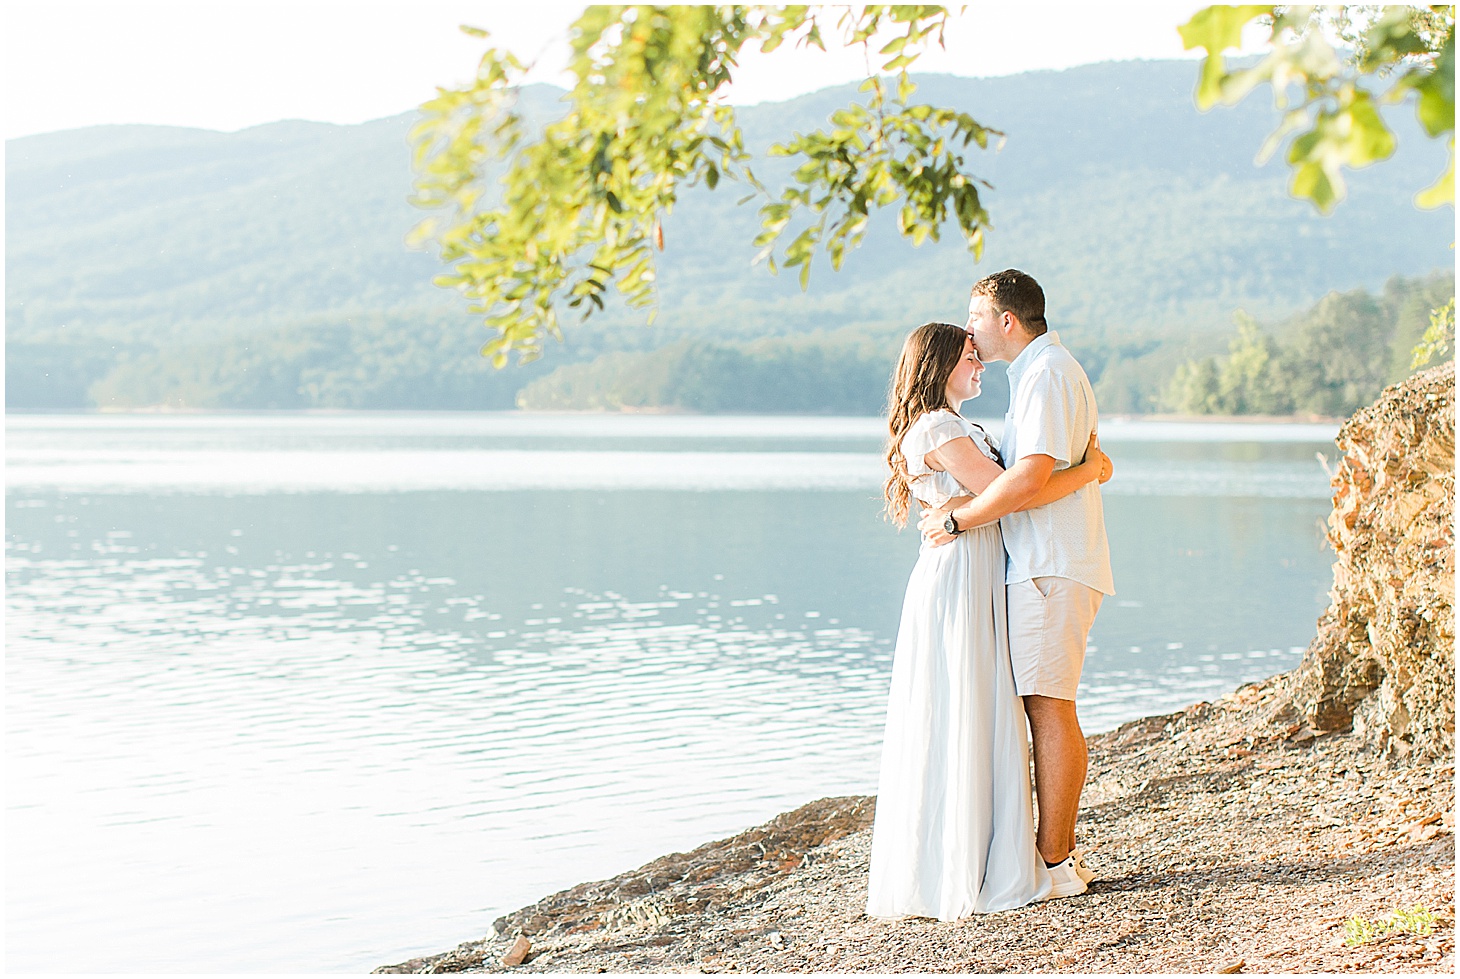 carvinscove_roanokeengagementsession_virginiaweddingphotographer_vaweddingphotographer_photo_0090.jpg